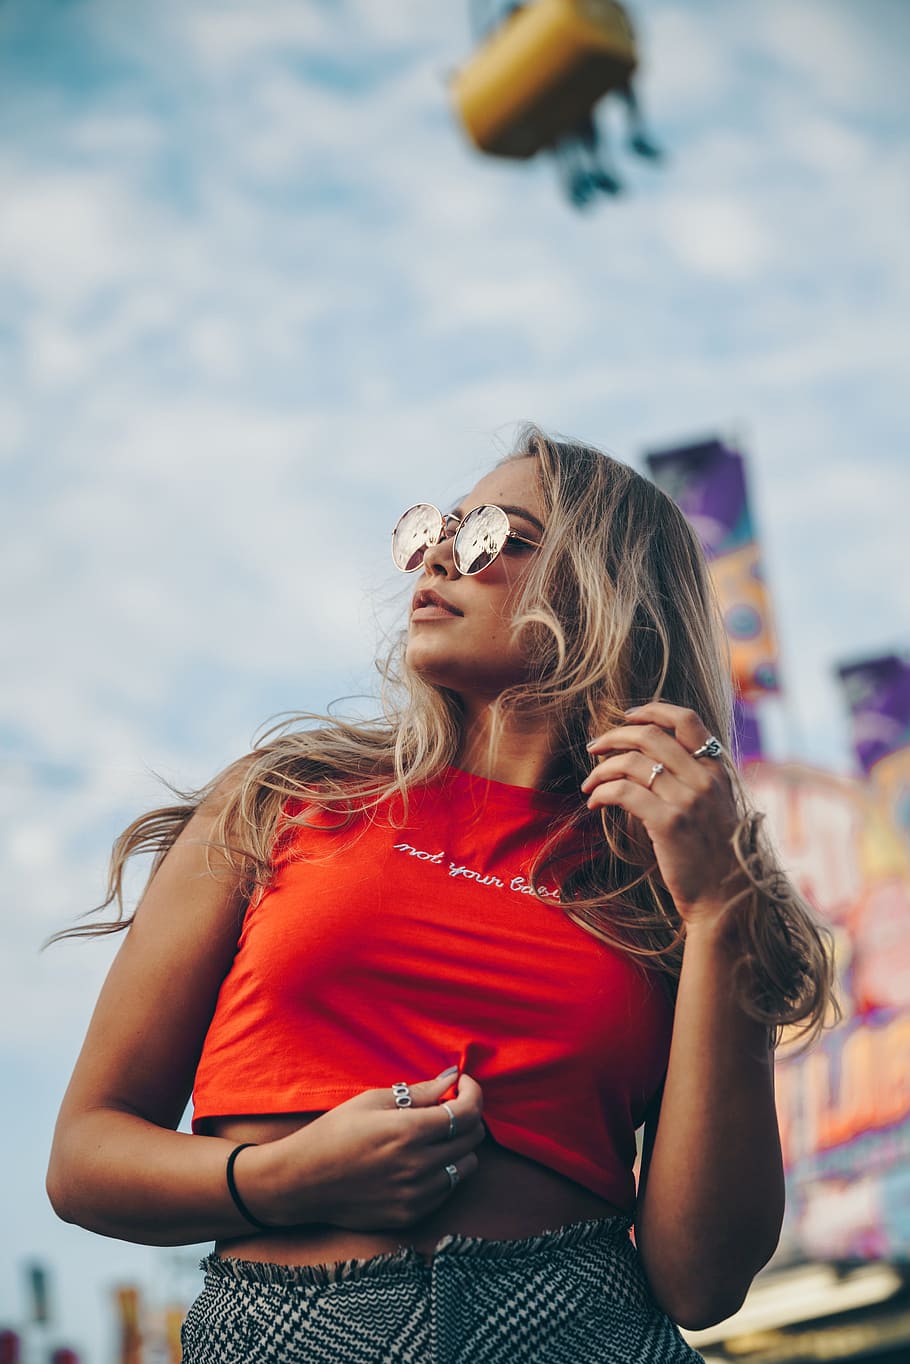 Young Attractive Girl Stylish Sunglasses Poses Stock Photo 1606573873 |  Shutterstock